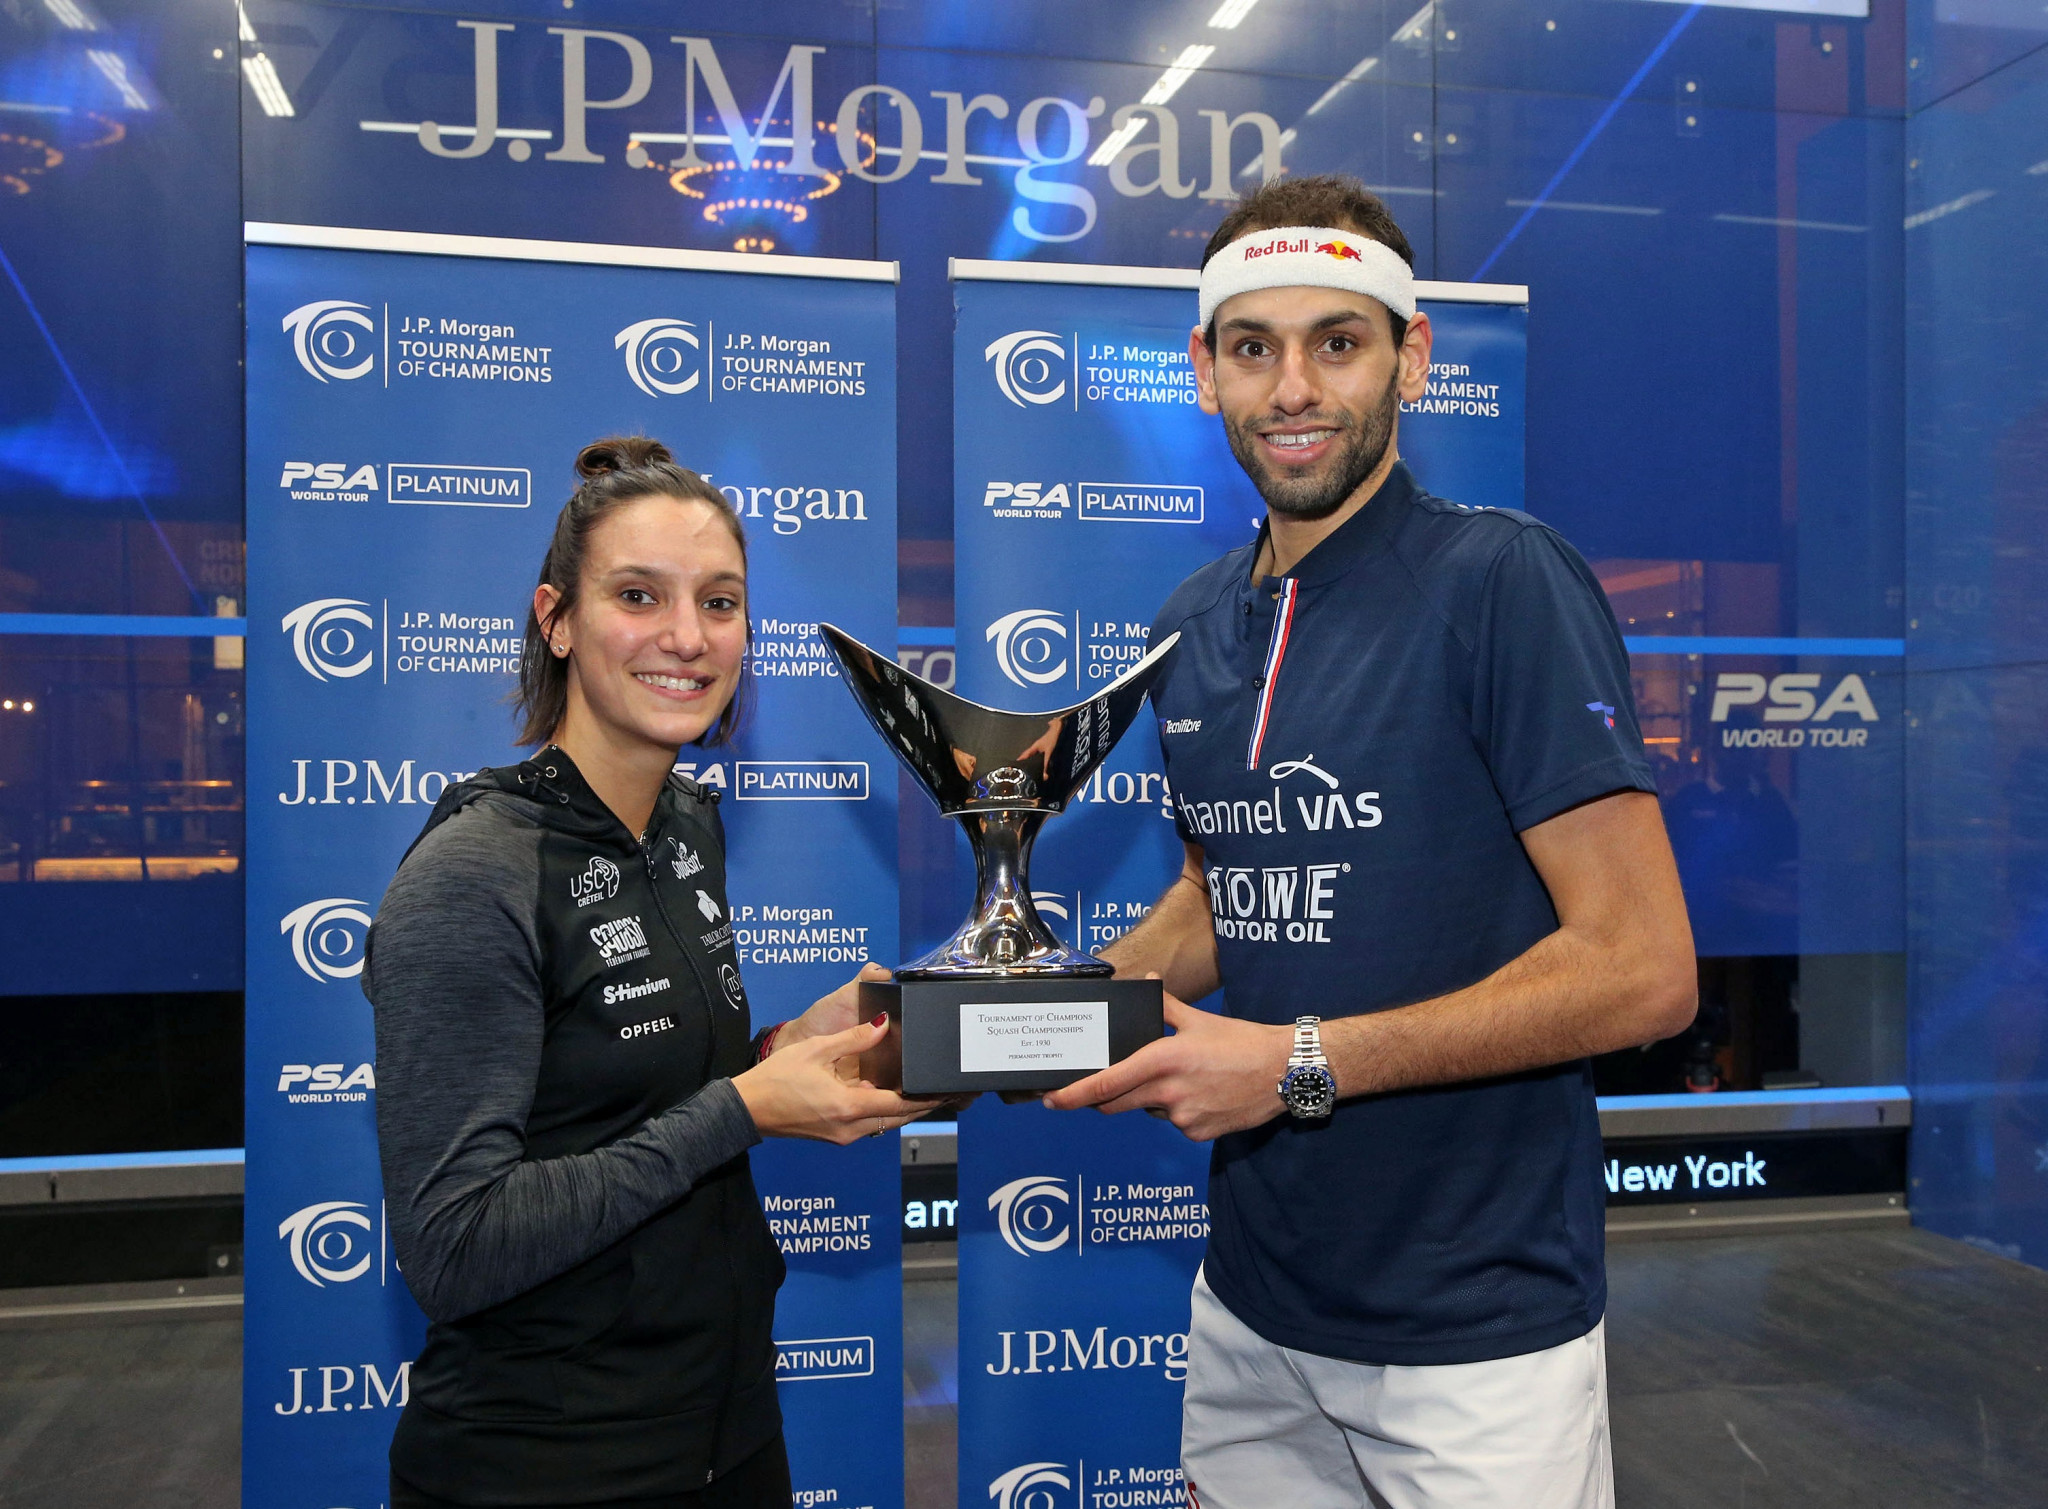 Egypt's Mohamed ElShorbagy and France’s Camille Serme lifted the PSA Tournament of Champions titles today ©PSA